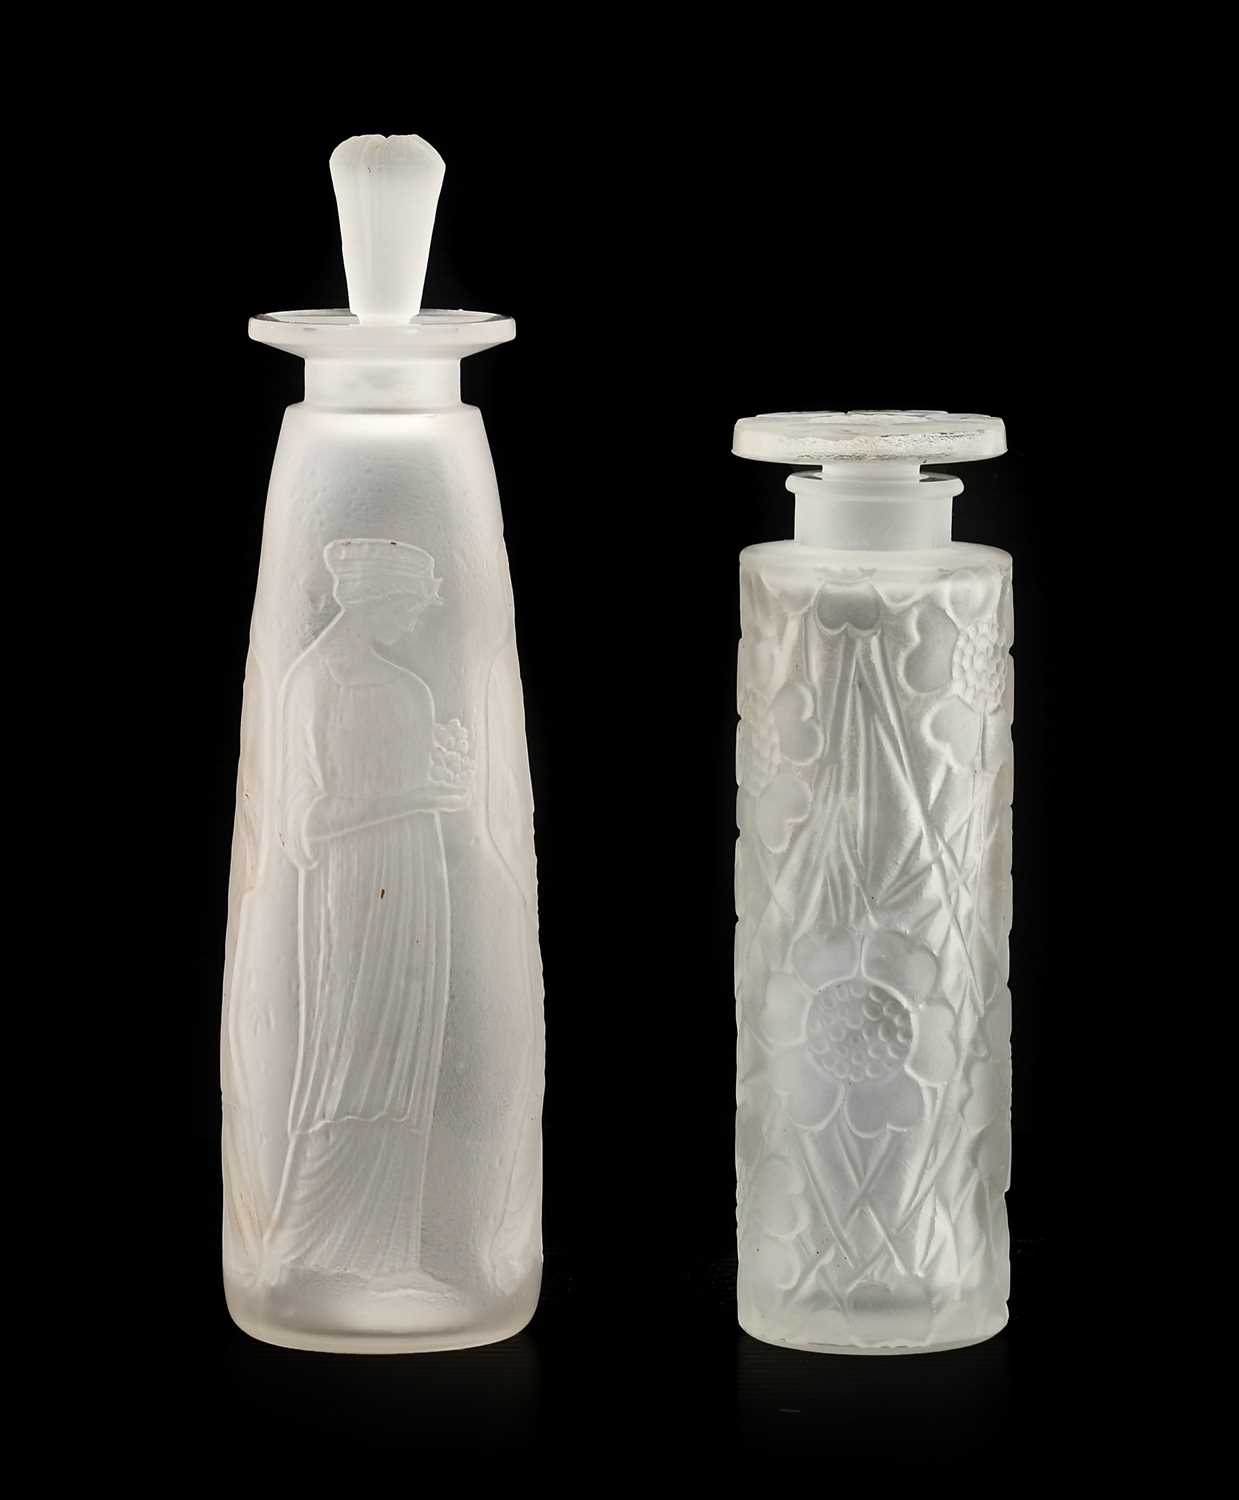 Lot 7 - René Lalique (French, 1860-1945) for Coty: A...